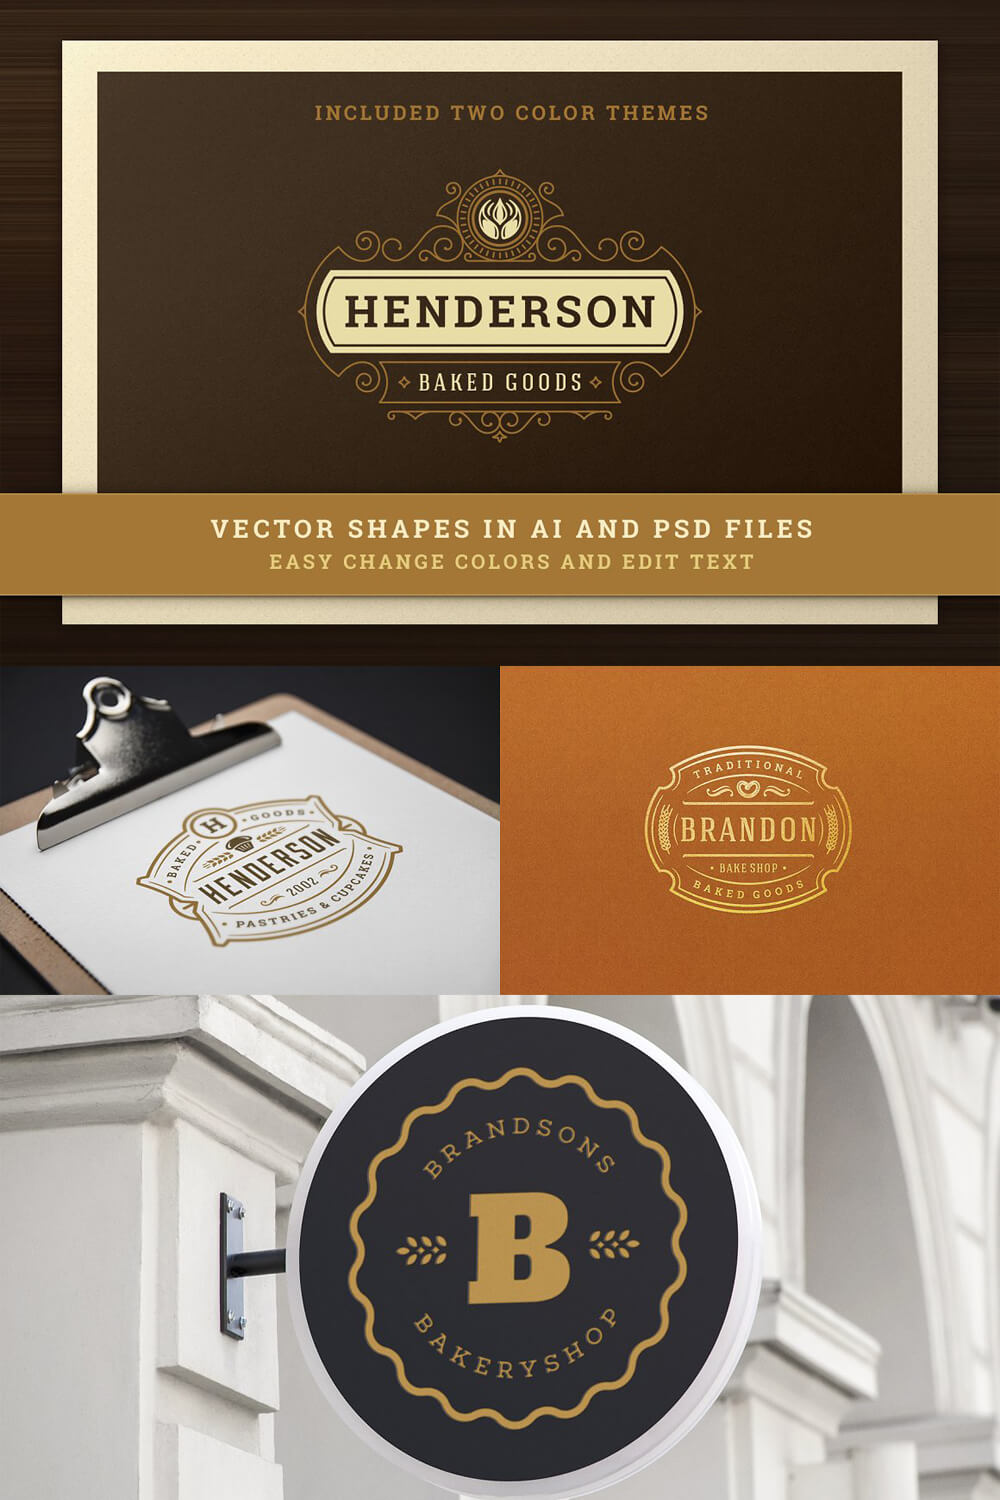 Images with logo "Included two color themes, Henderson, Baked goods".